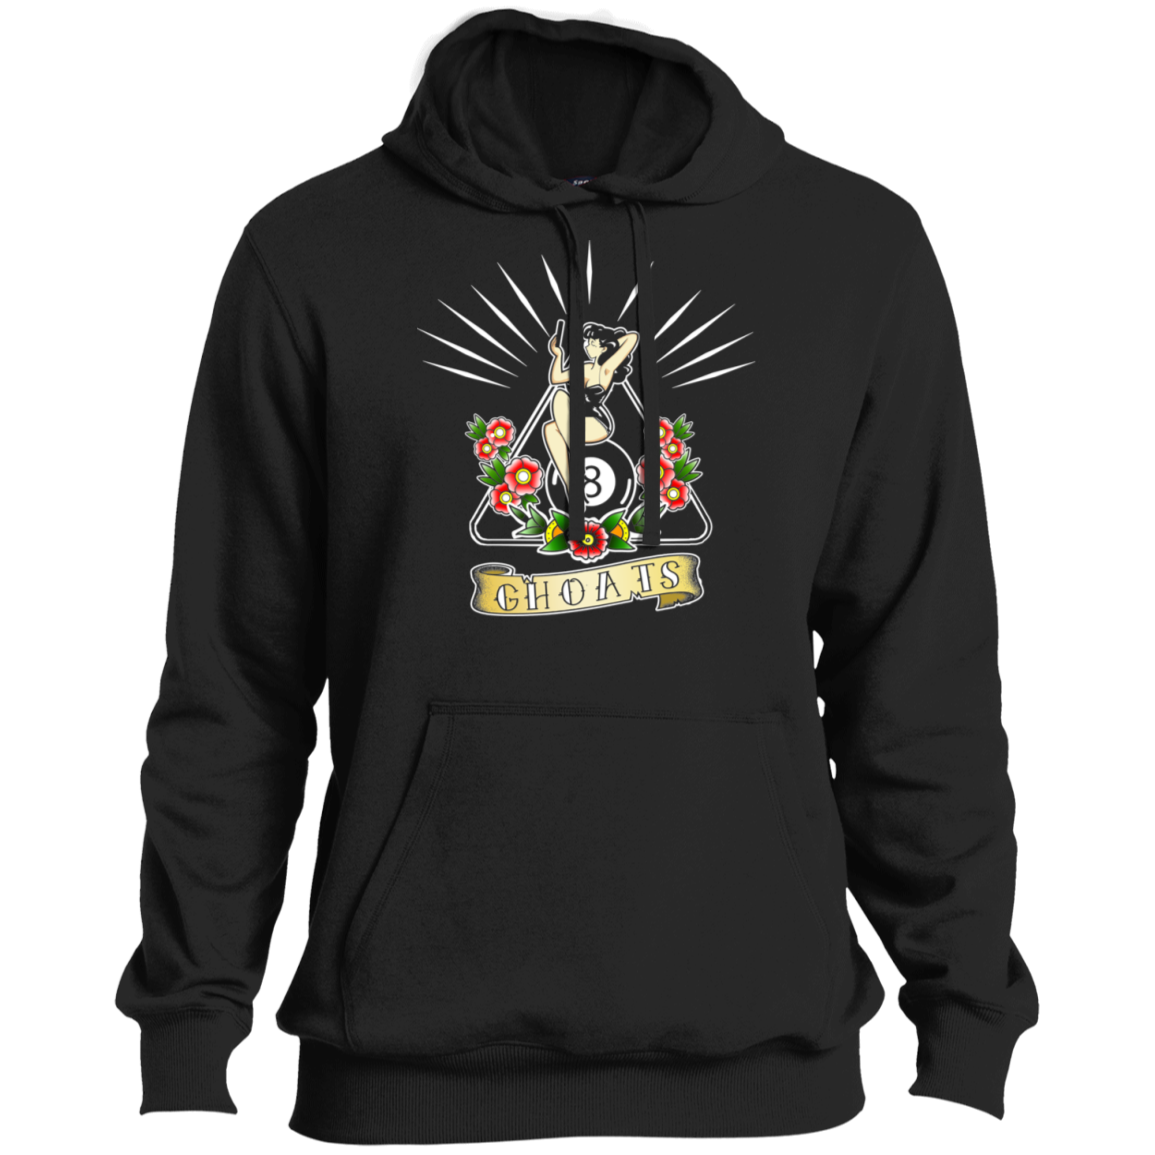 The GHOATS Custom Design. #23 Pin Up Girl. Ultra Soft Pullover Hoodie